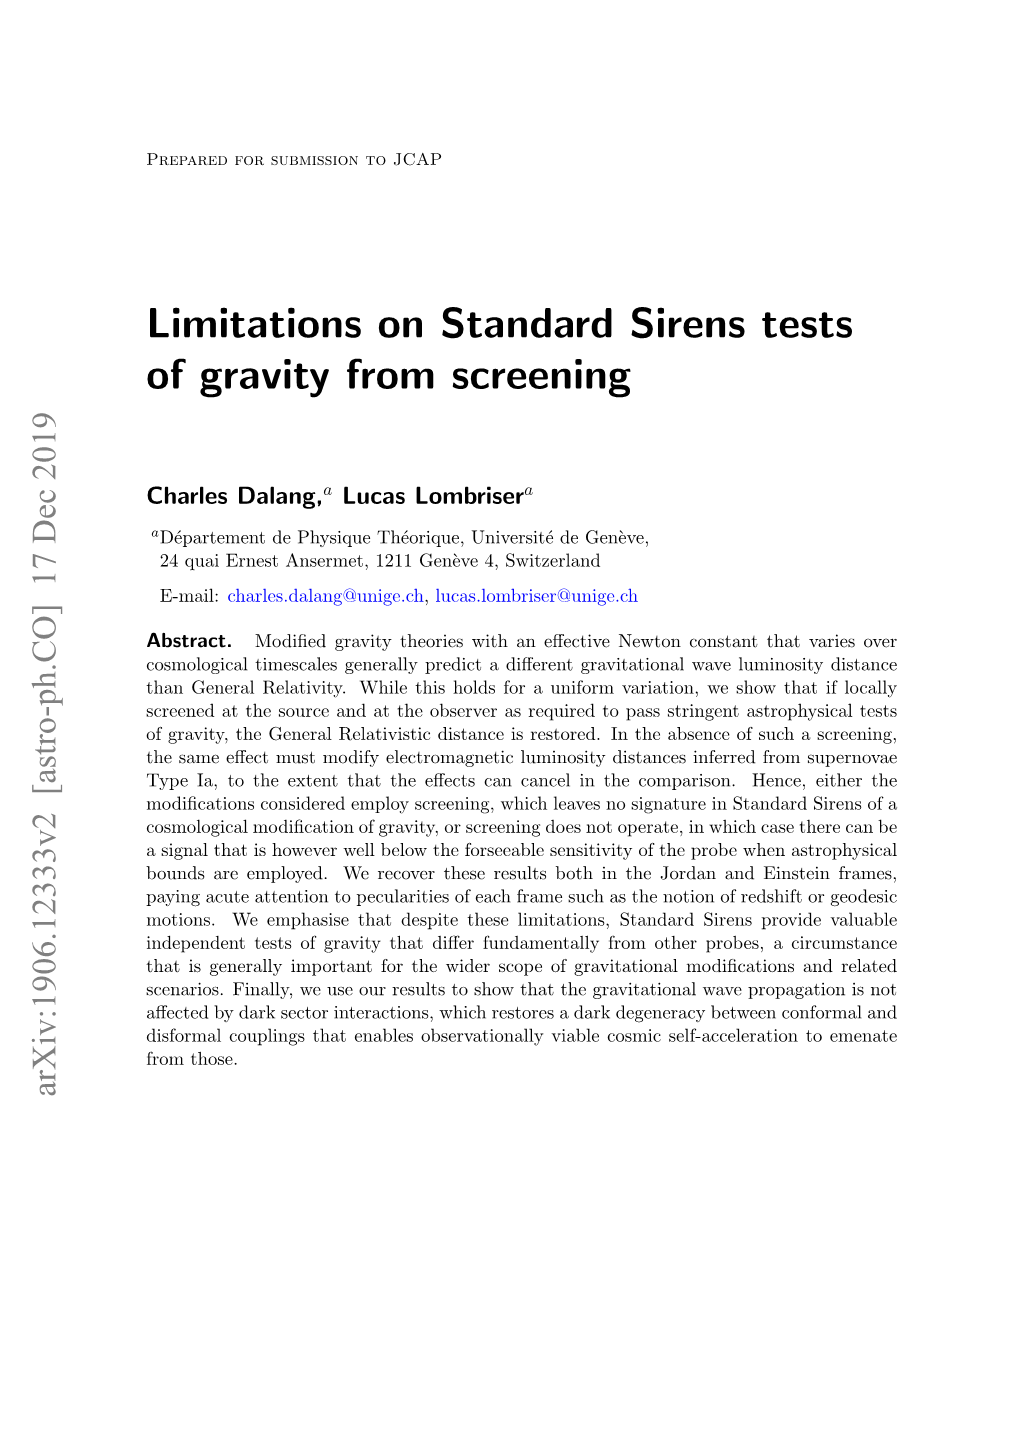 Limitations on Standard Sirens Tests of Gravity from Screening